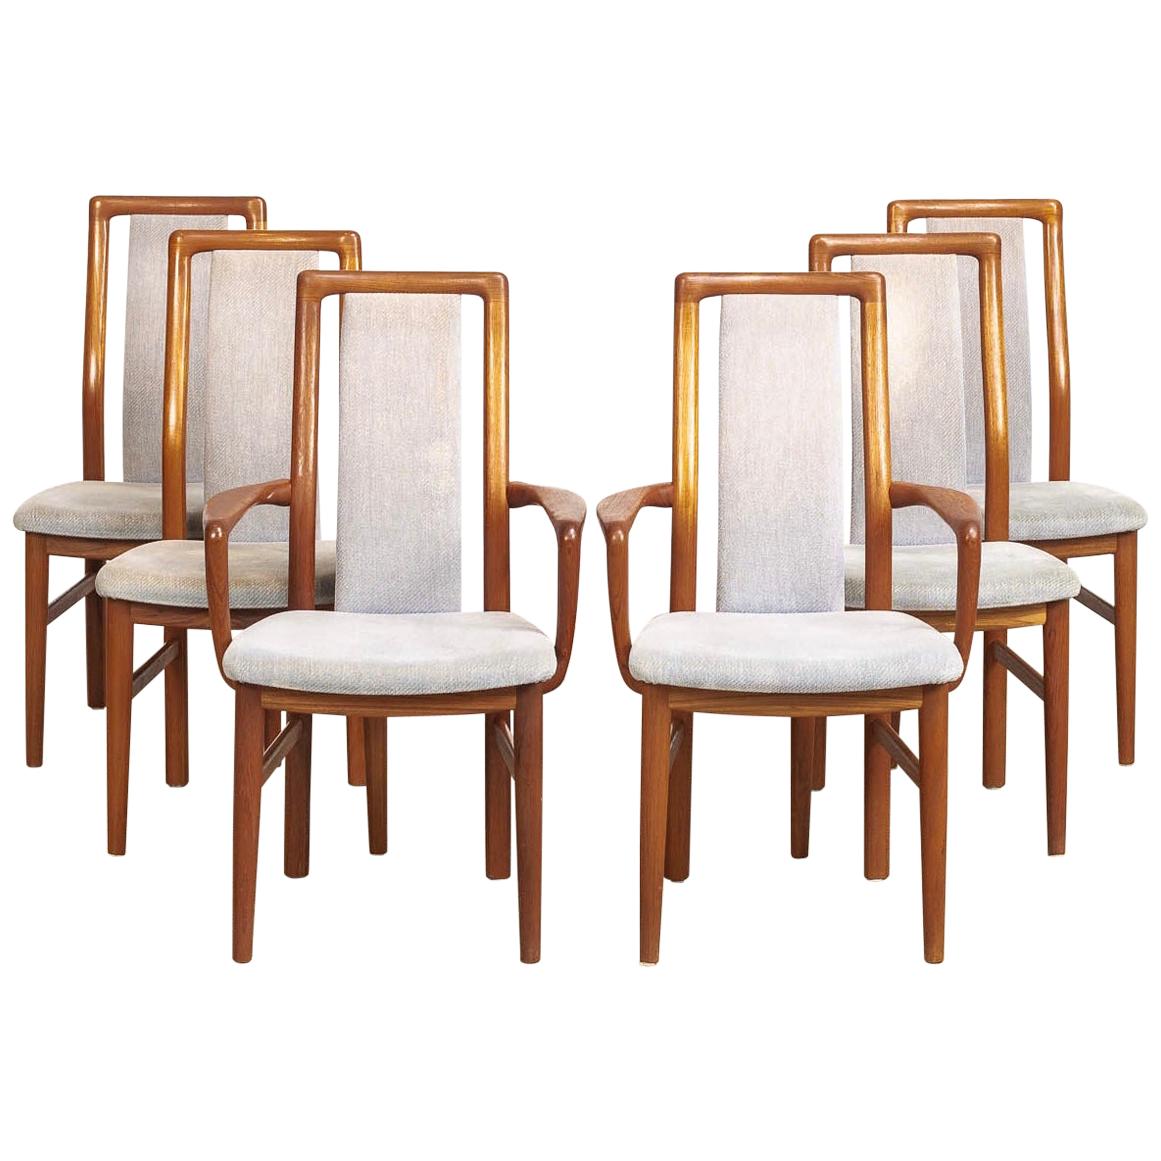 Mid-Century Danish Modern Teak Wood Upholstered Dining Chairs, Set of 6 For Sale